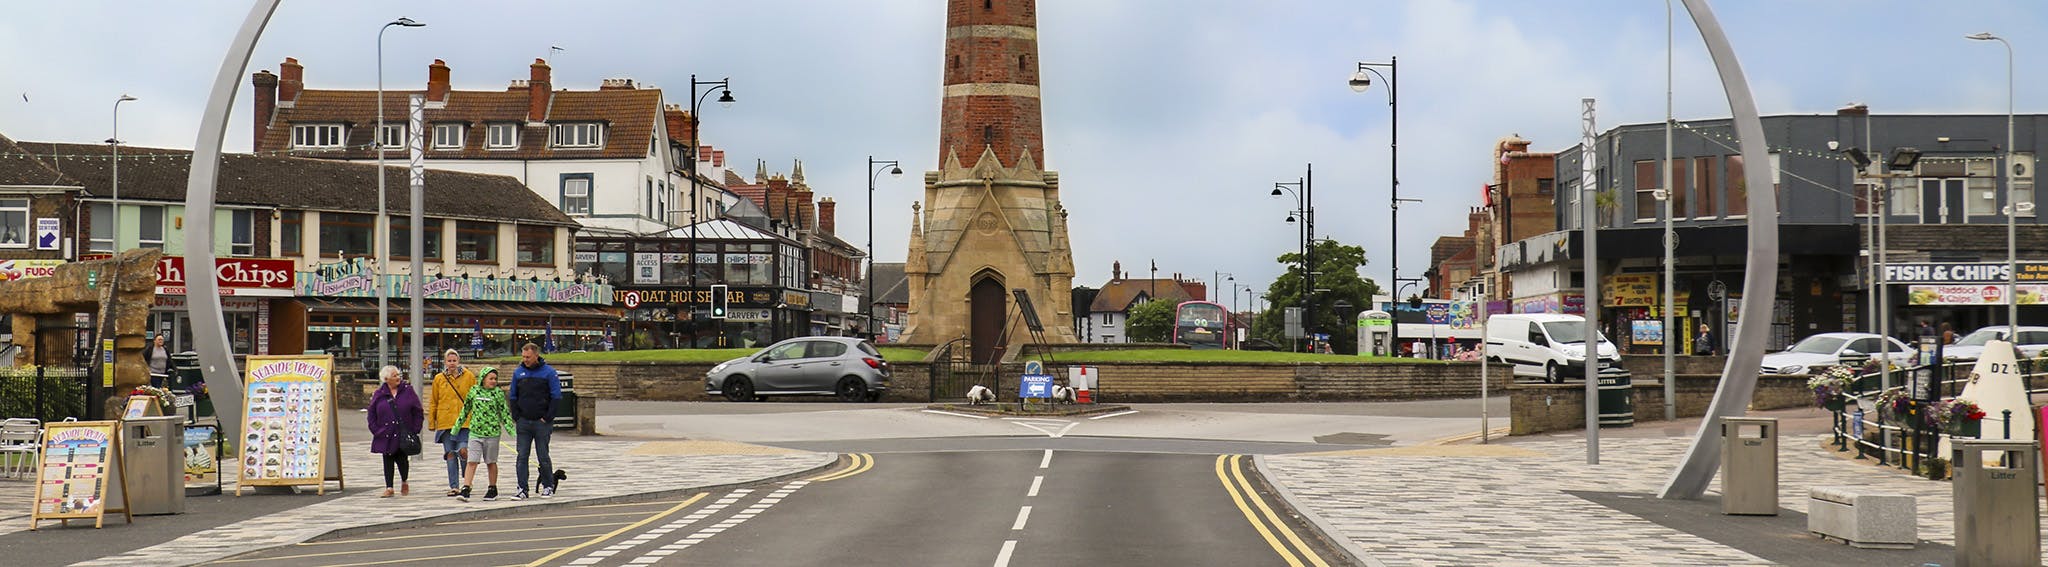 Street scene in the centre of Skegness with the clock tower, cars and people